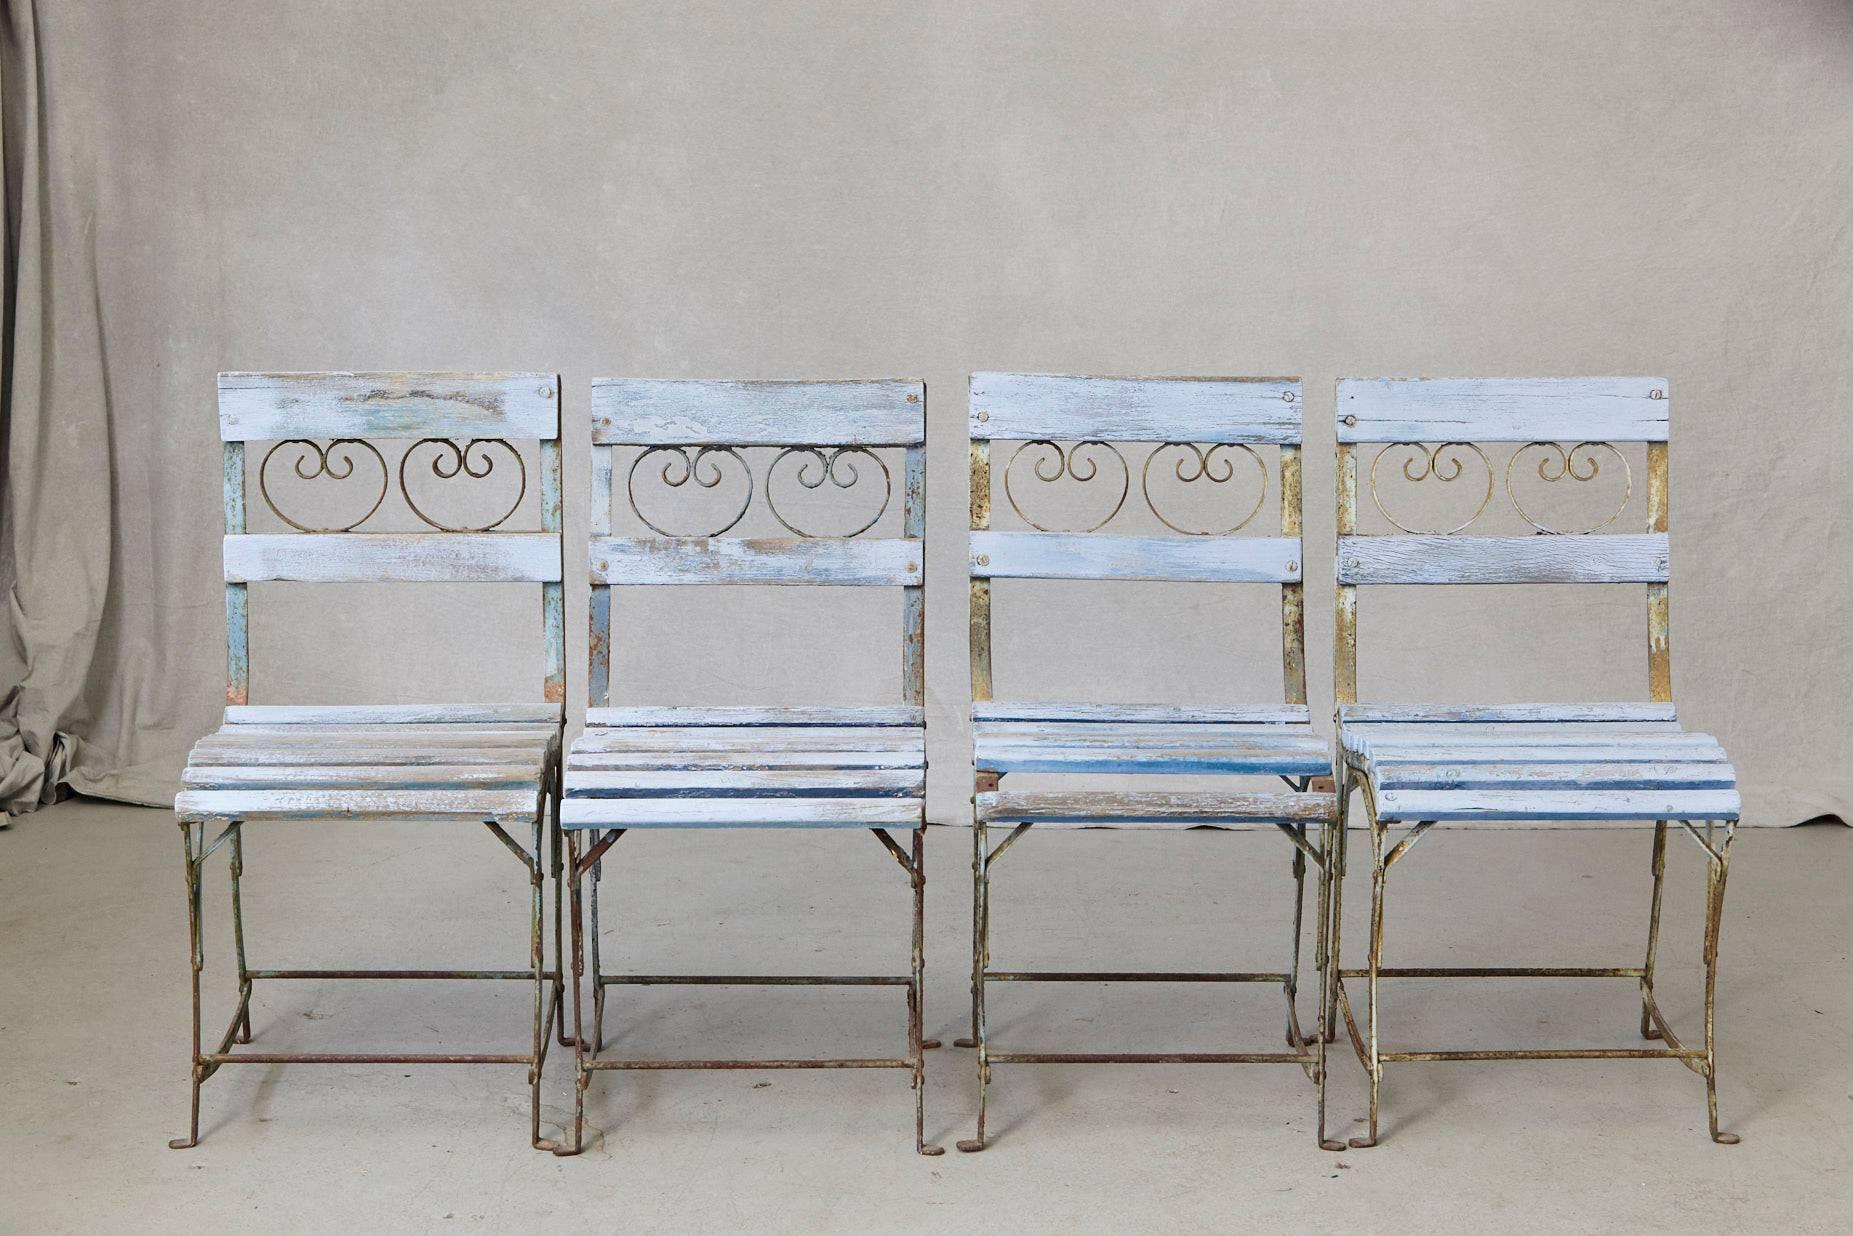 Beautiful set of four French wrought iron garden chairs with blueish wooden slats, circa 1920s.
The chairs have been painted at one point in their life, the blue is faded out, there are paint chips and loss very charming look, beautifully weathered